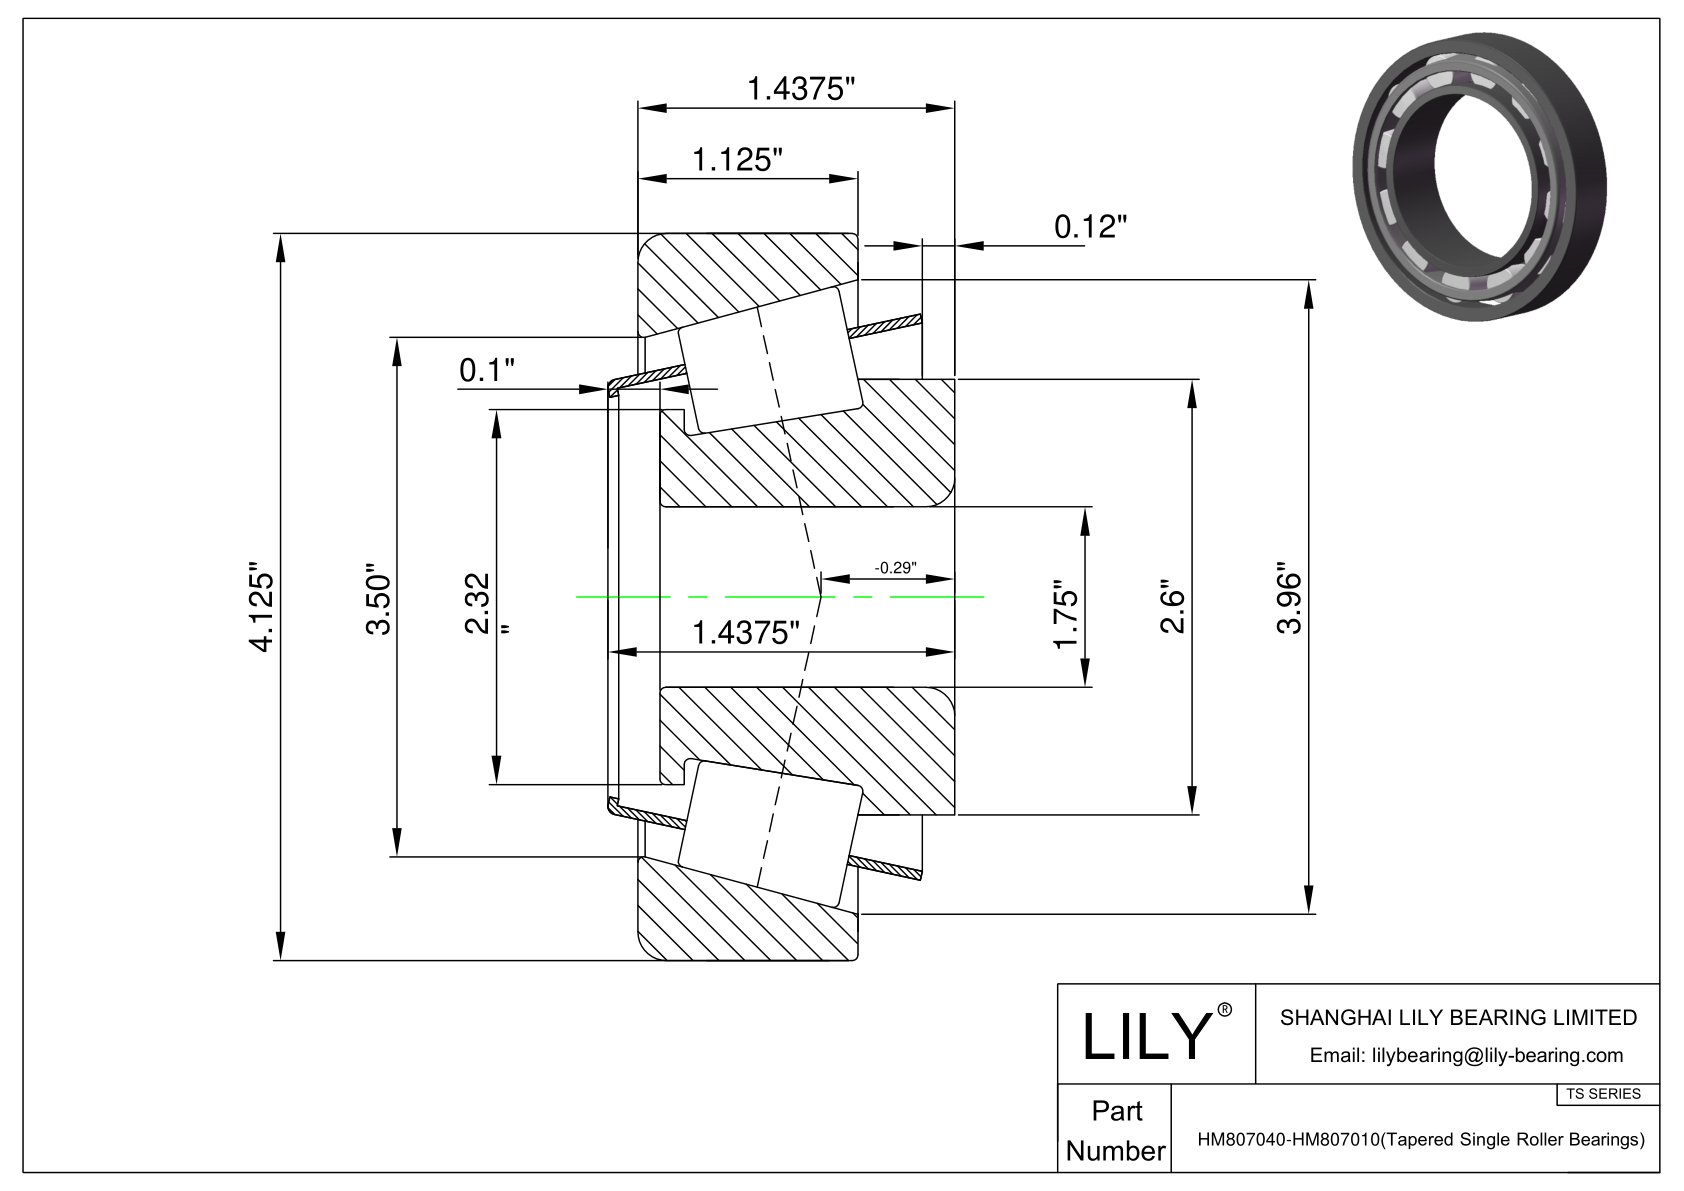 HM807040-HM807010 TS (Tapered Single Roller Bearings) (Imperial) cad drawing